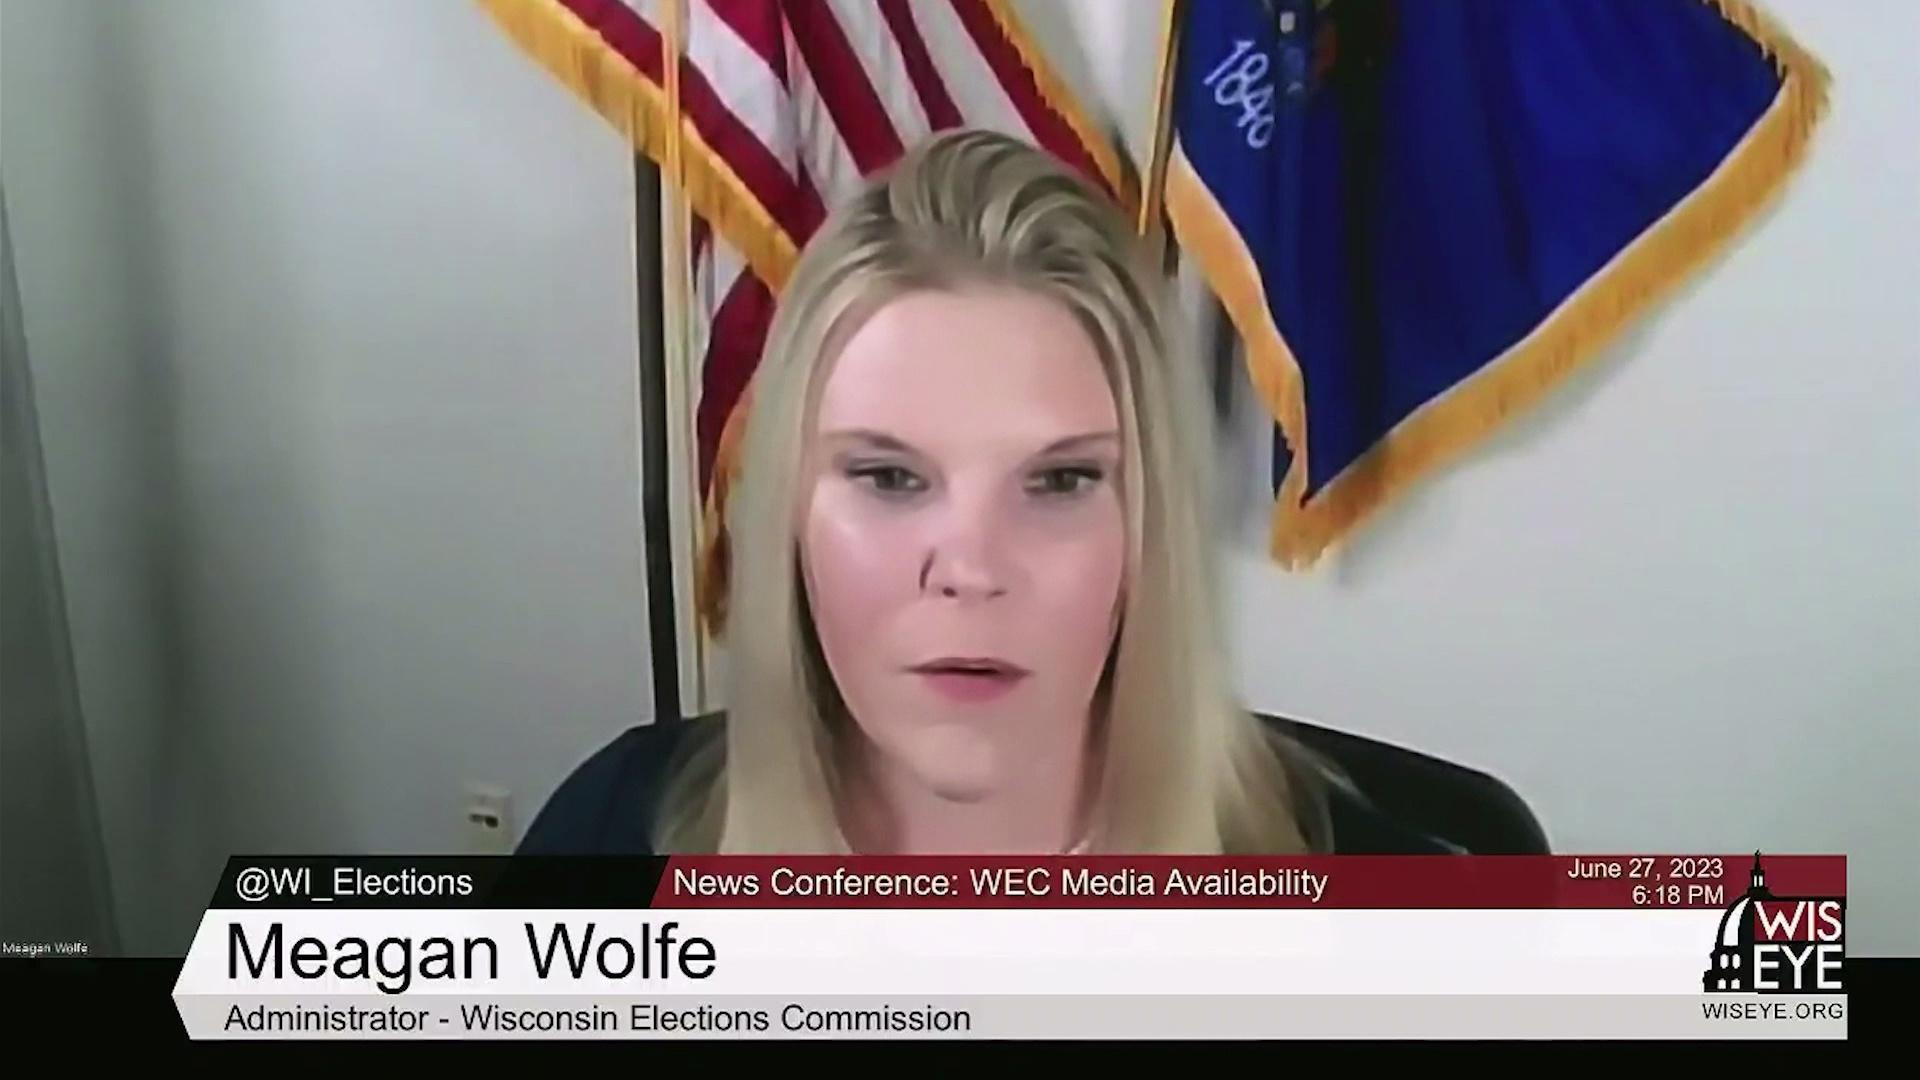 A still image from a video shows Meagan Wolfe seated in front of the U.S. and Wisconsin state flags with a graphic at bottom reading 'Meagan Wolfe' and 'Administrator - Wisconsin Elections Commission.'